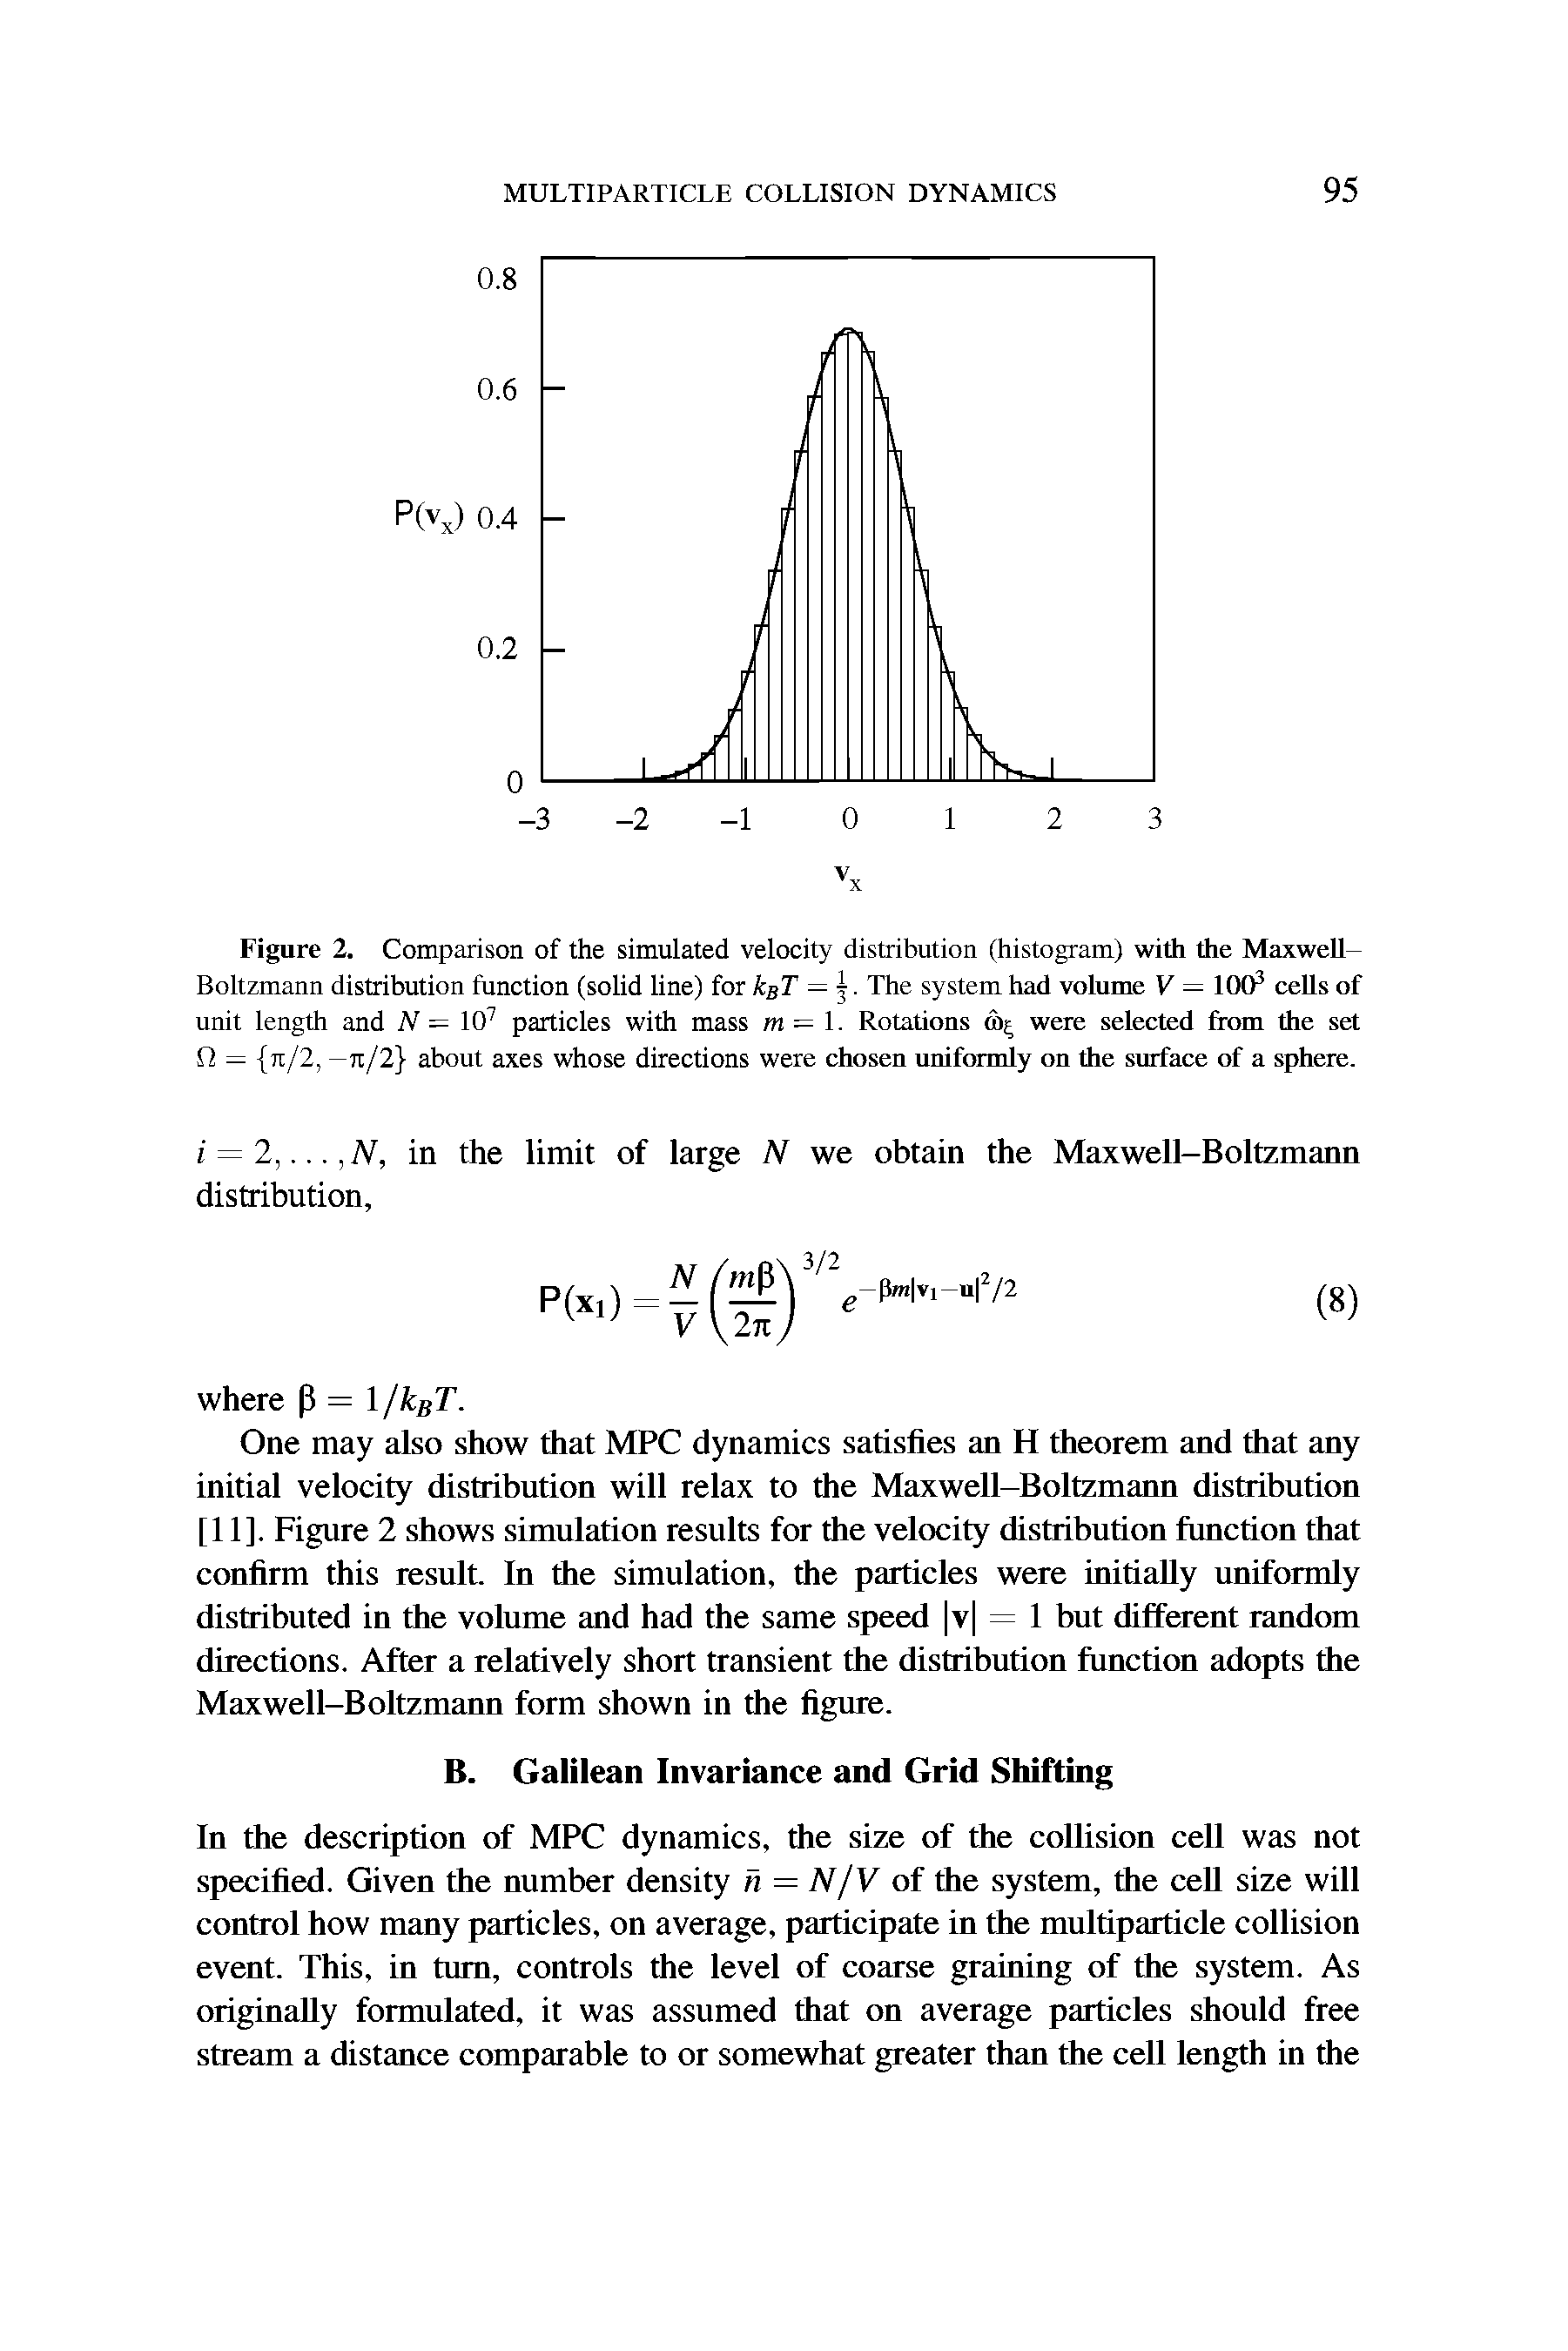 Figure 2. Comparison of the simulated velocity distribution (histogram) with the Maxwell— Boltzmann distribution function (solid line) for kgT —. The system had volume V — 1003 cells of unit length and N = 107 particles with mass m = 1. Rotations (b were selected from the set Q — tt/2, — ti/2 about axes whose directions were chosen uniformly on the surface of a sphere.